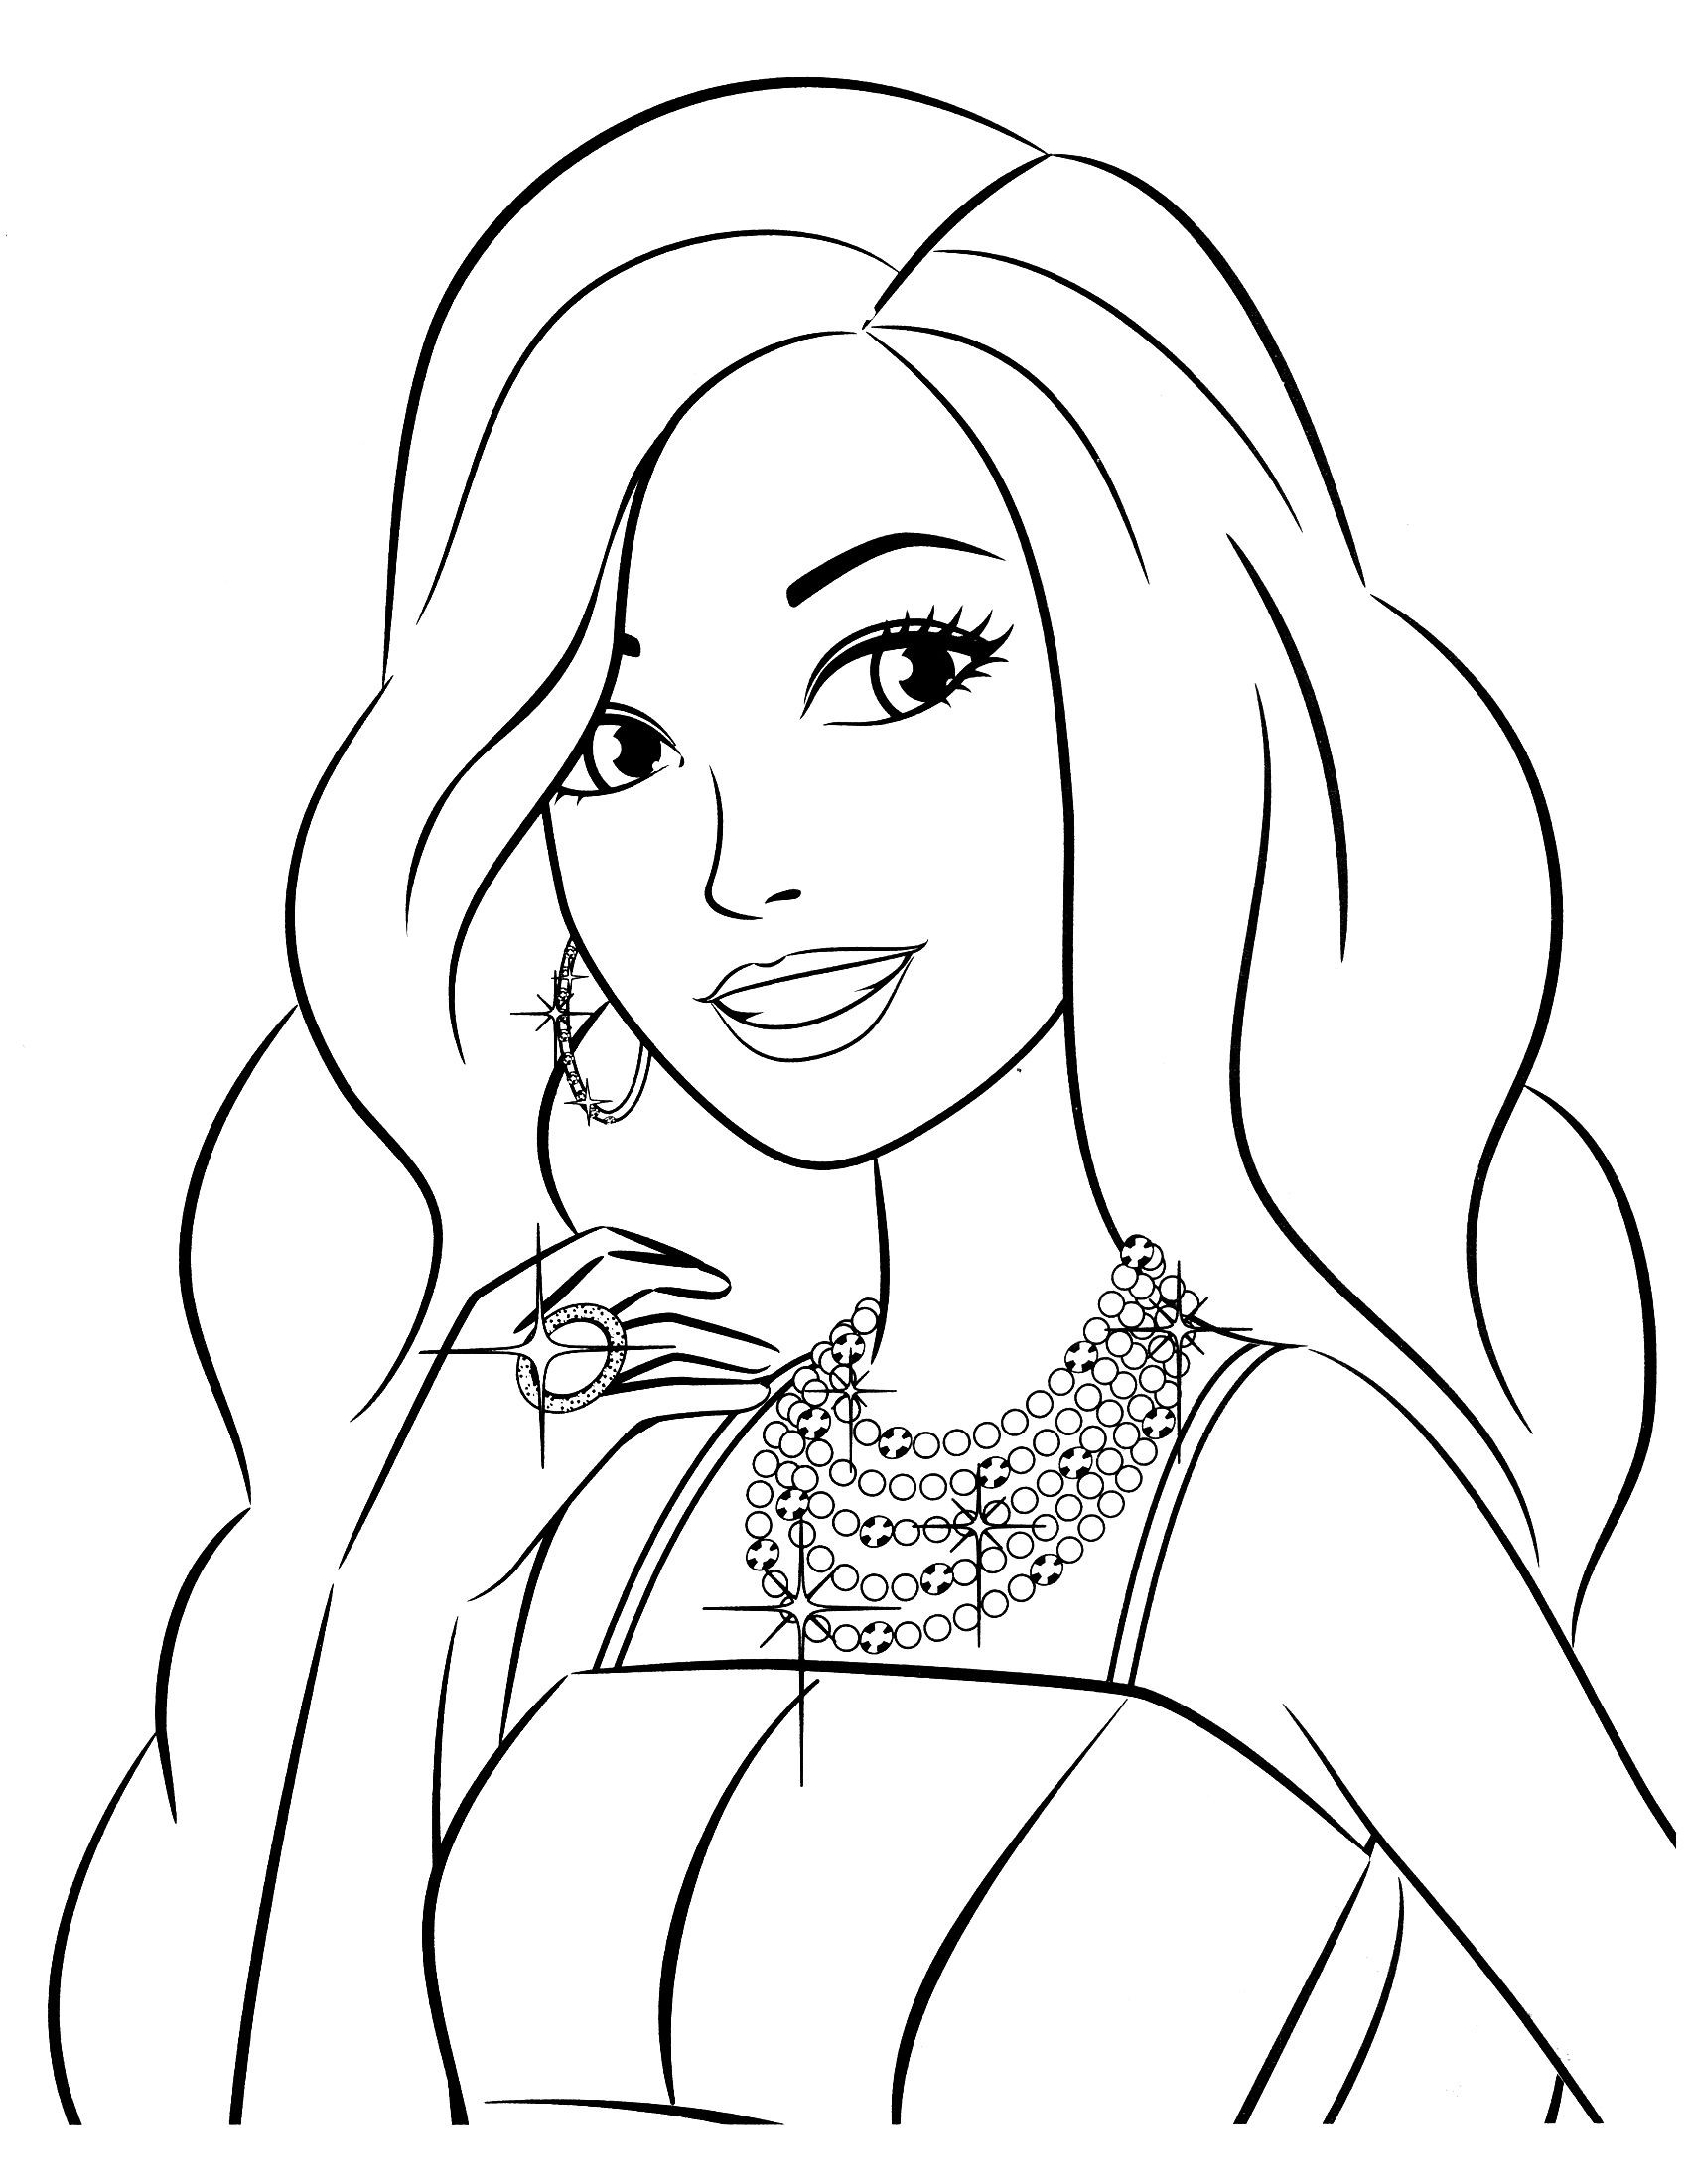 With Barbie coloring pages online your little girls choose the color of dress and hair color as same with their imagination